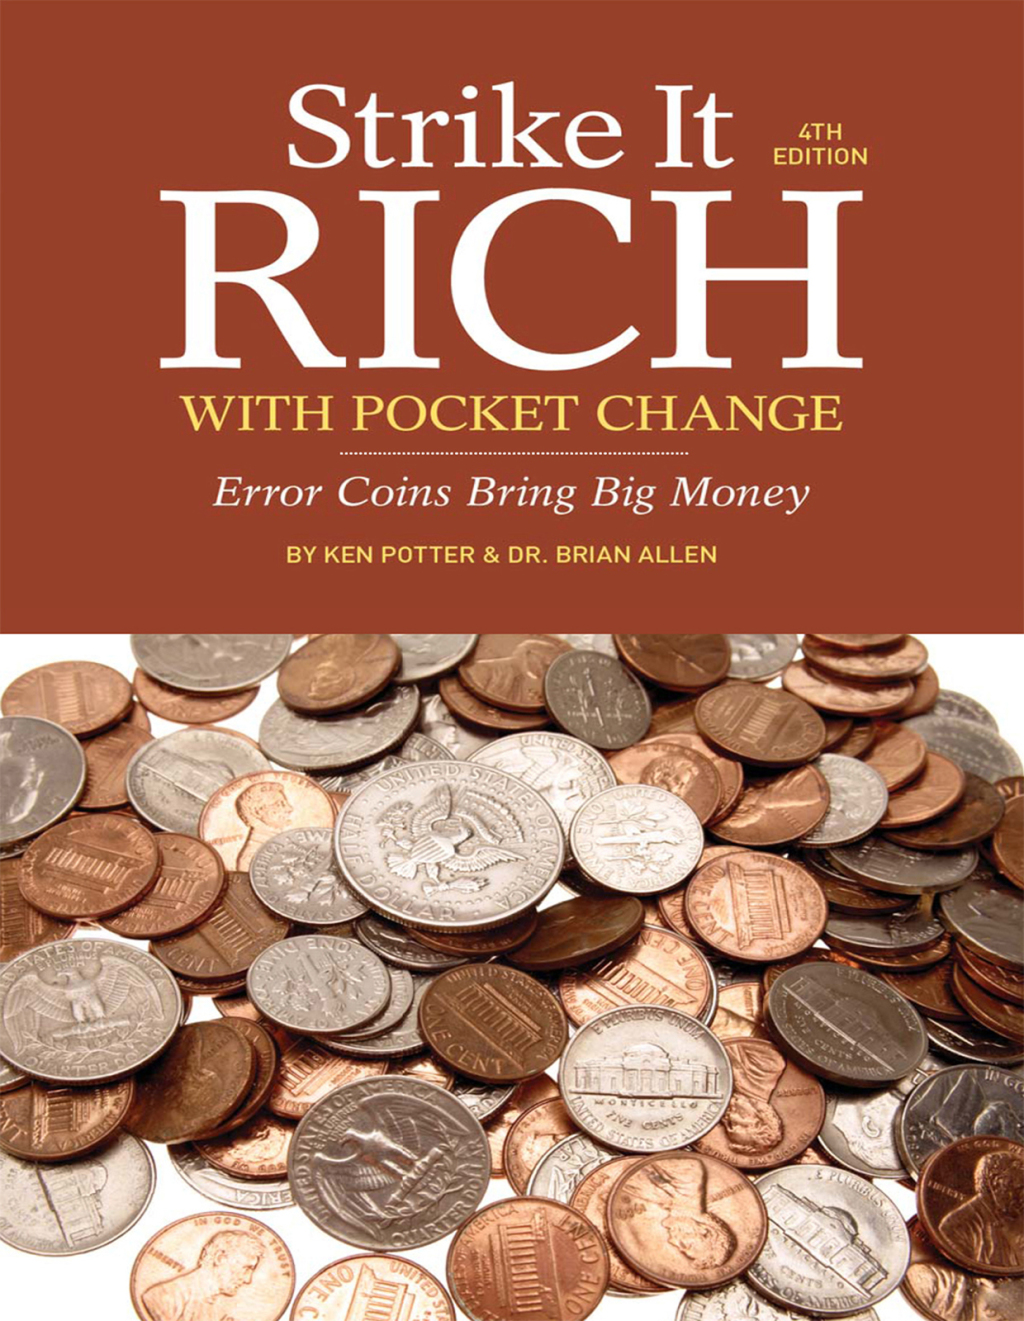 Strike It Rich with Pocket Change - 4th Edition (eBook)